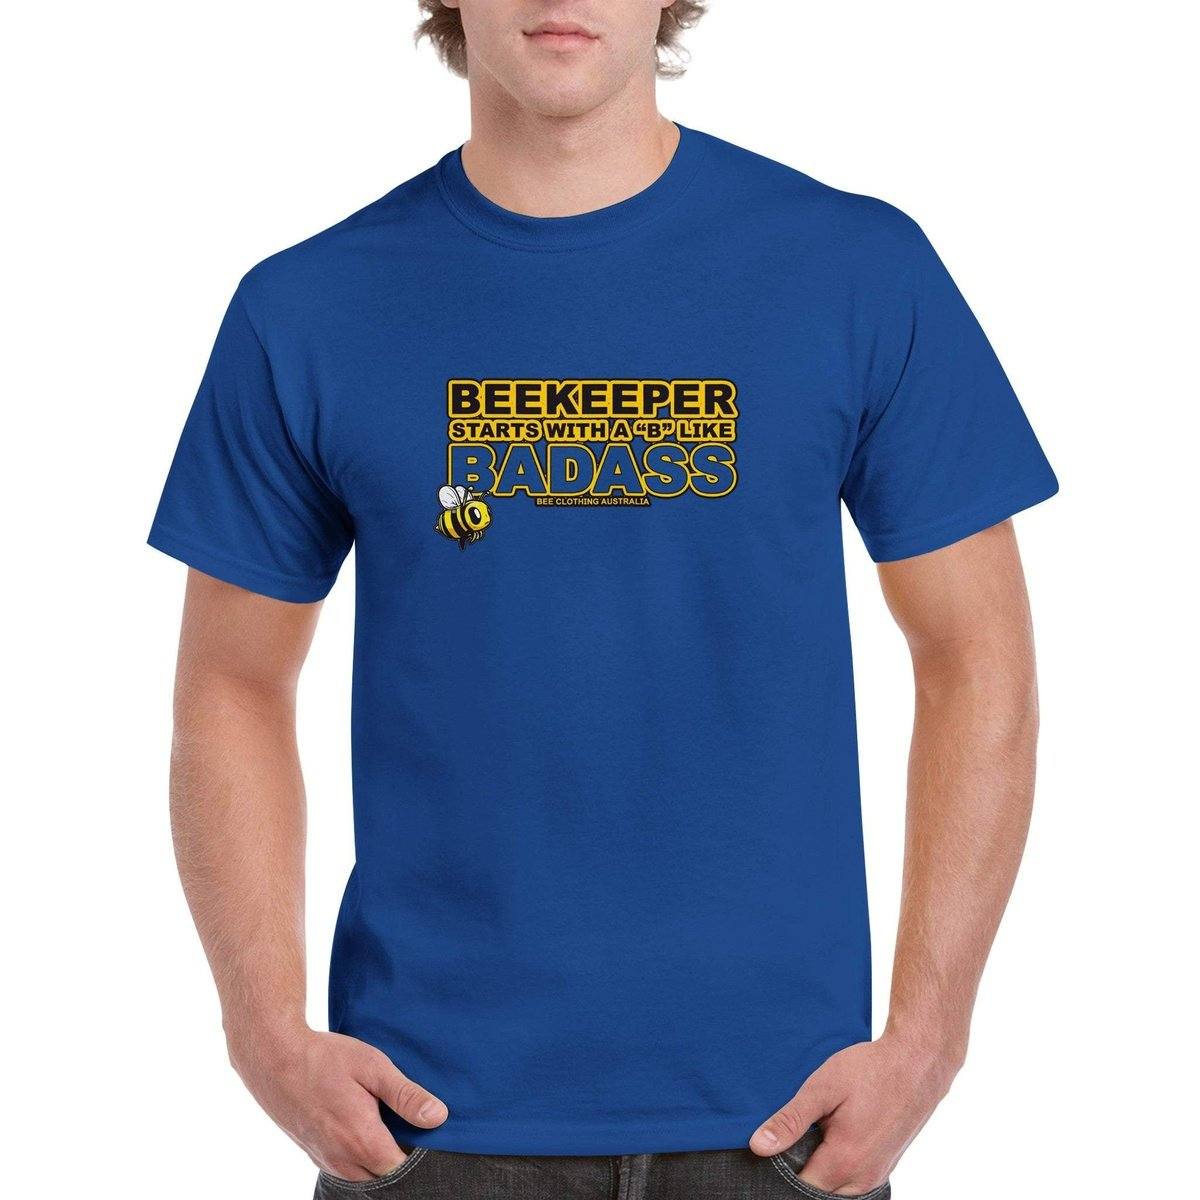 Beekeeper Starts With a B Like BADASS T-Shirt - Badass beekeeper Tshirt - Unisex Crewneck T-shirt Australia Online Color Royal / S